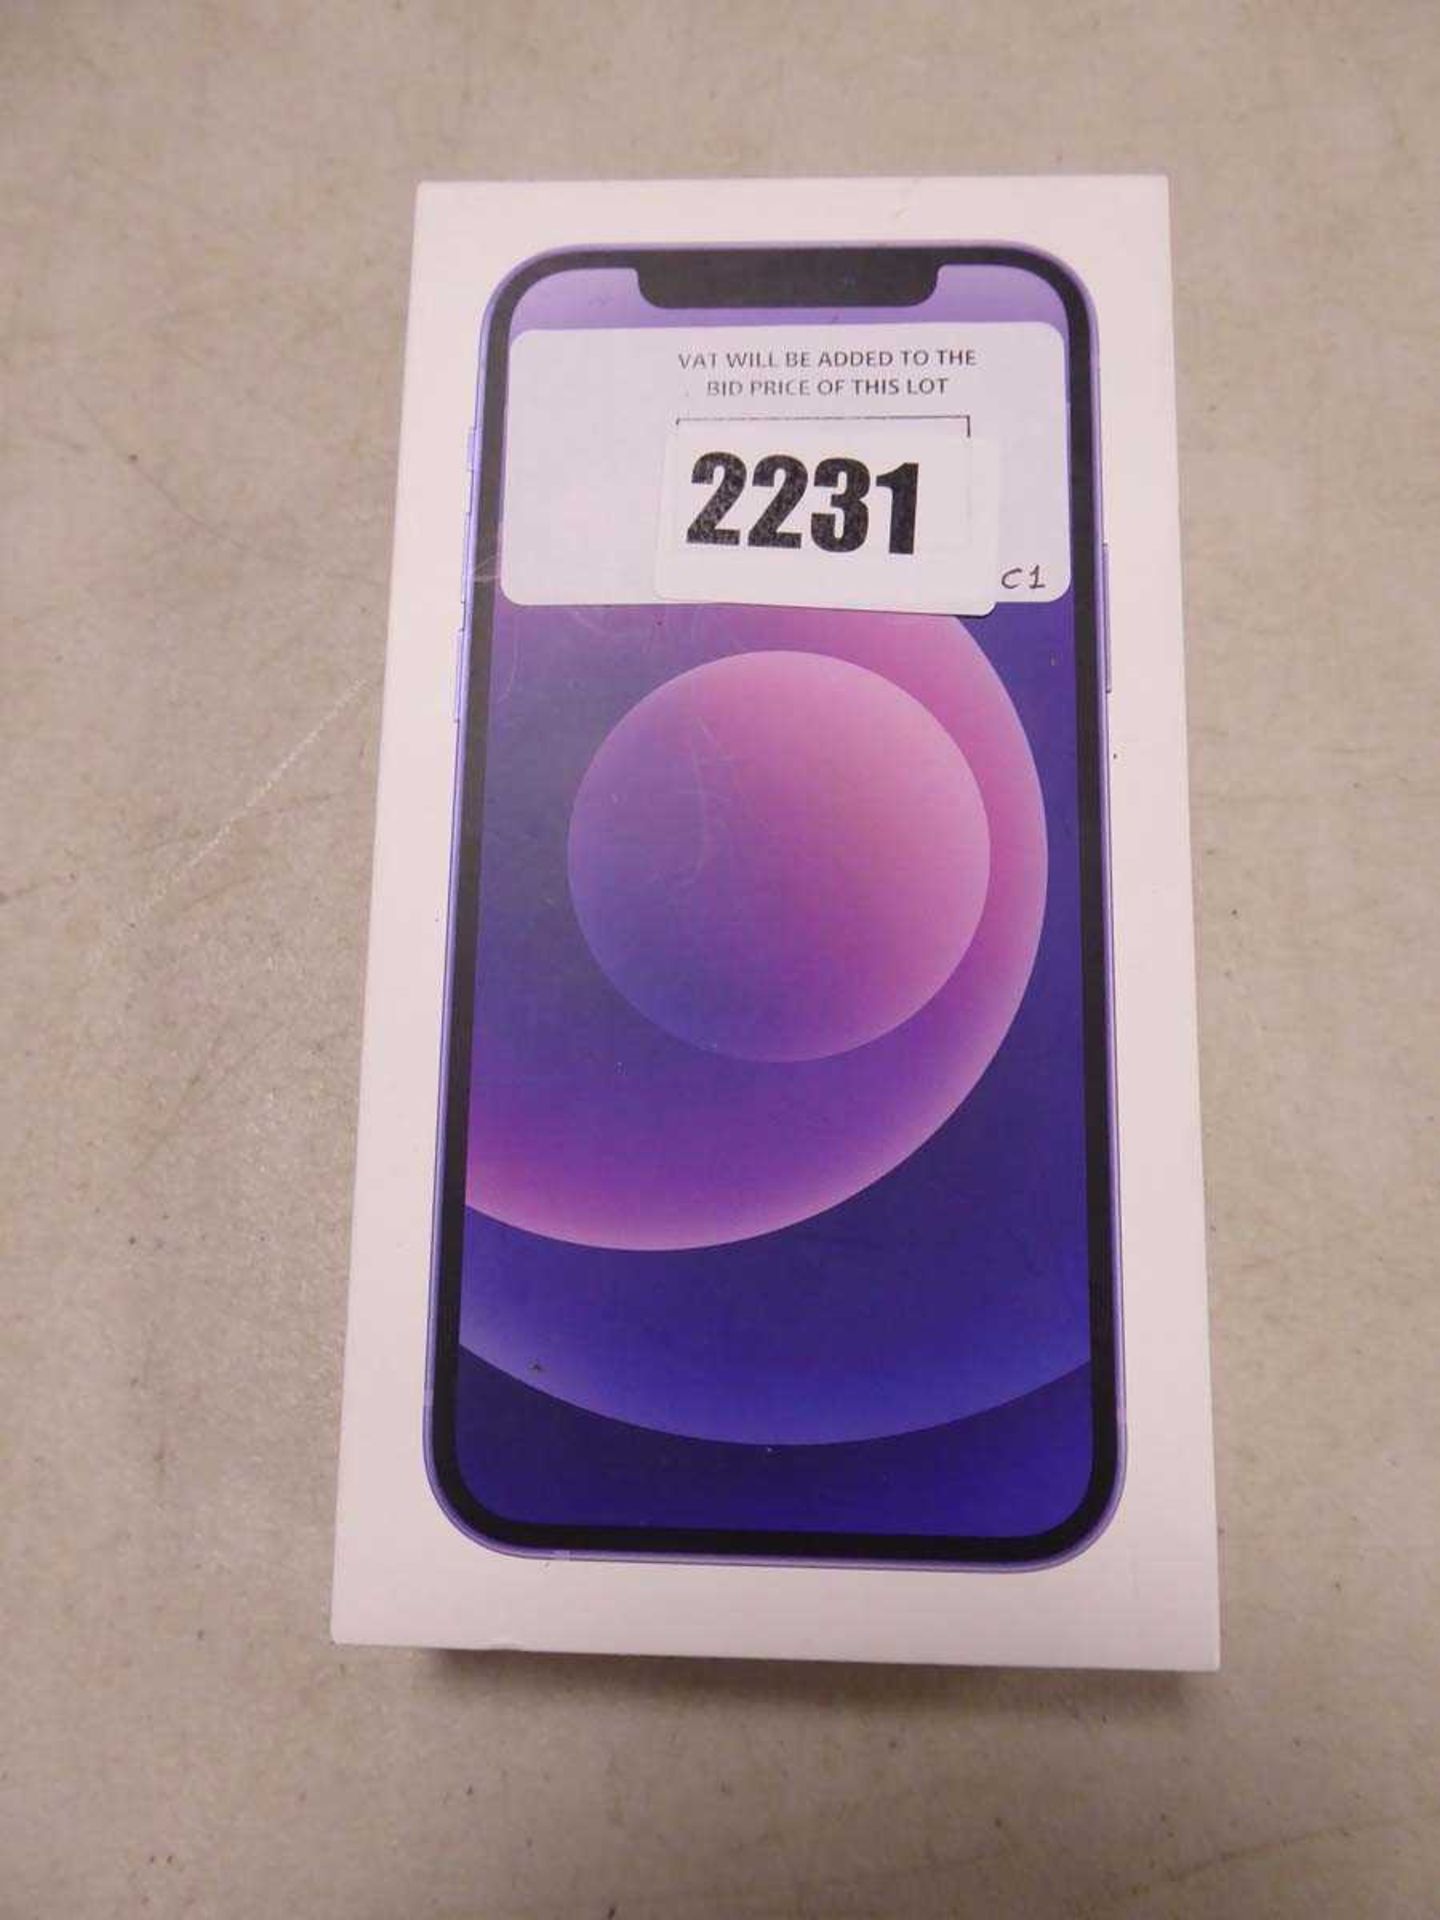 +VAT Apple iPhone 12 in purple, 128gb model A2403 with box - Image 2 of 2